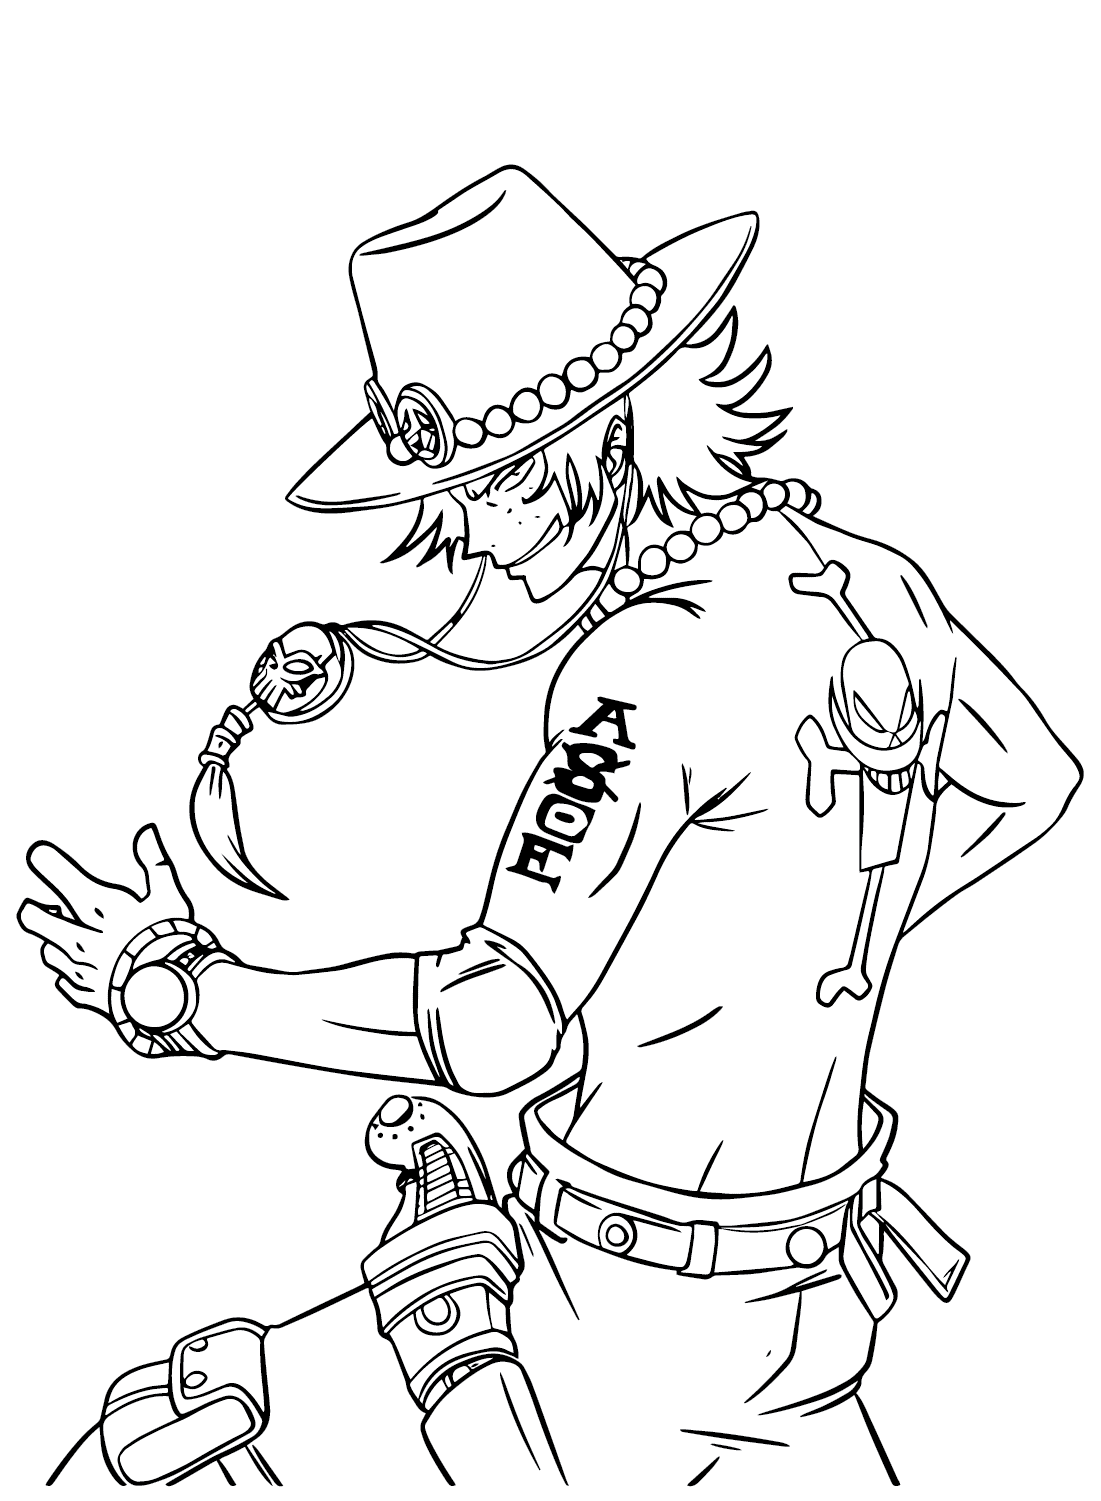 Portgas D. Ace One Piece Coloring Page from Portgas D. Ace